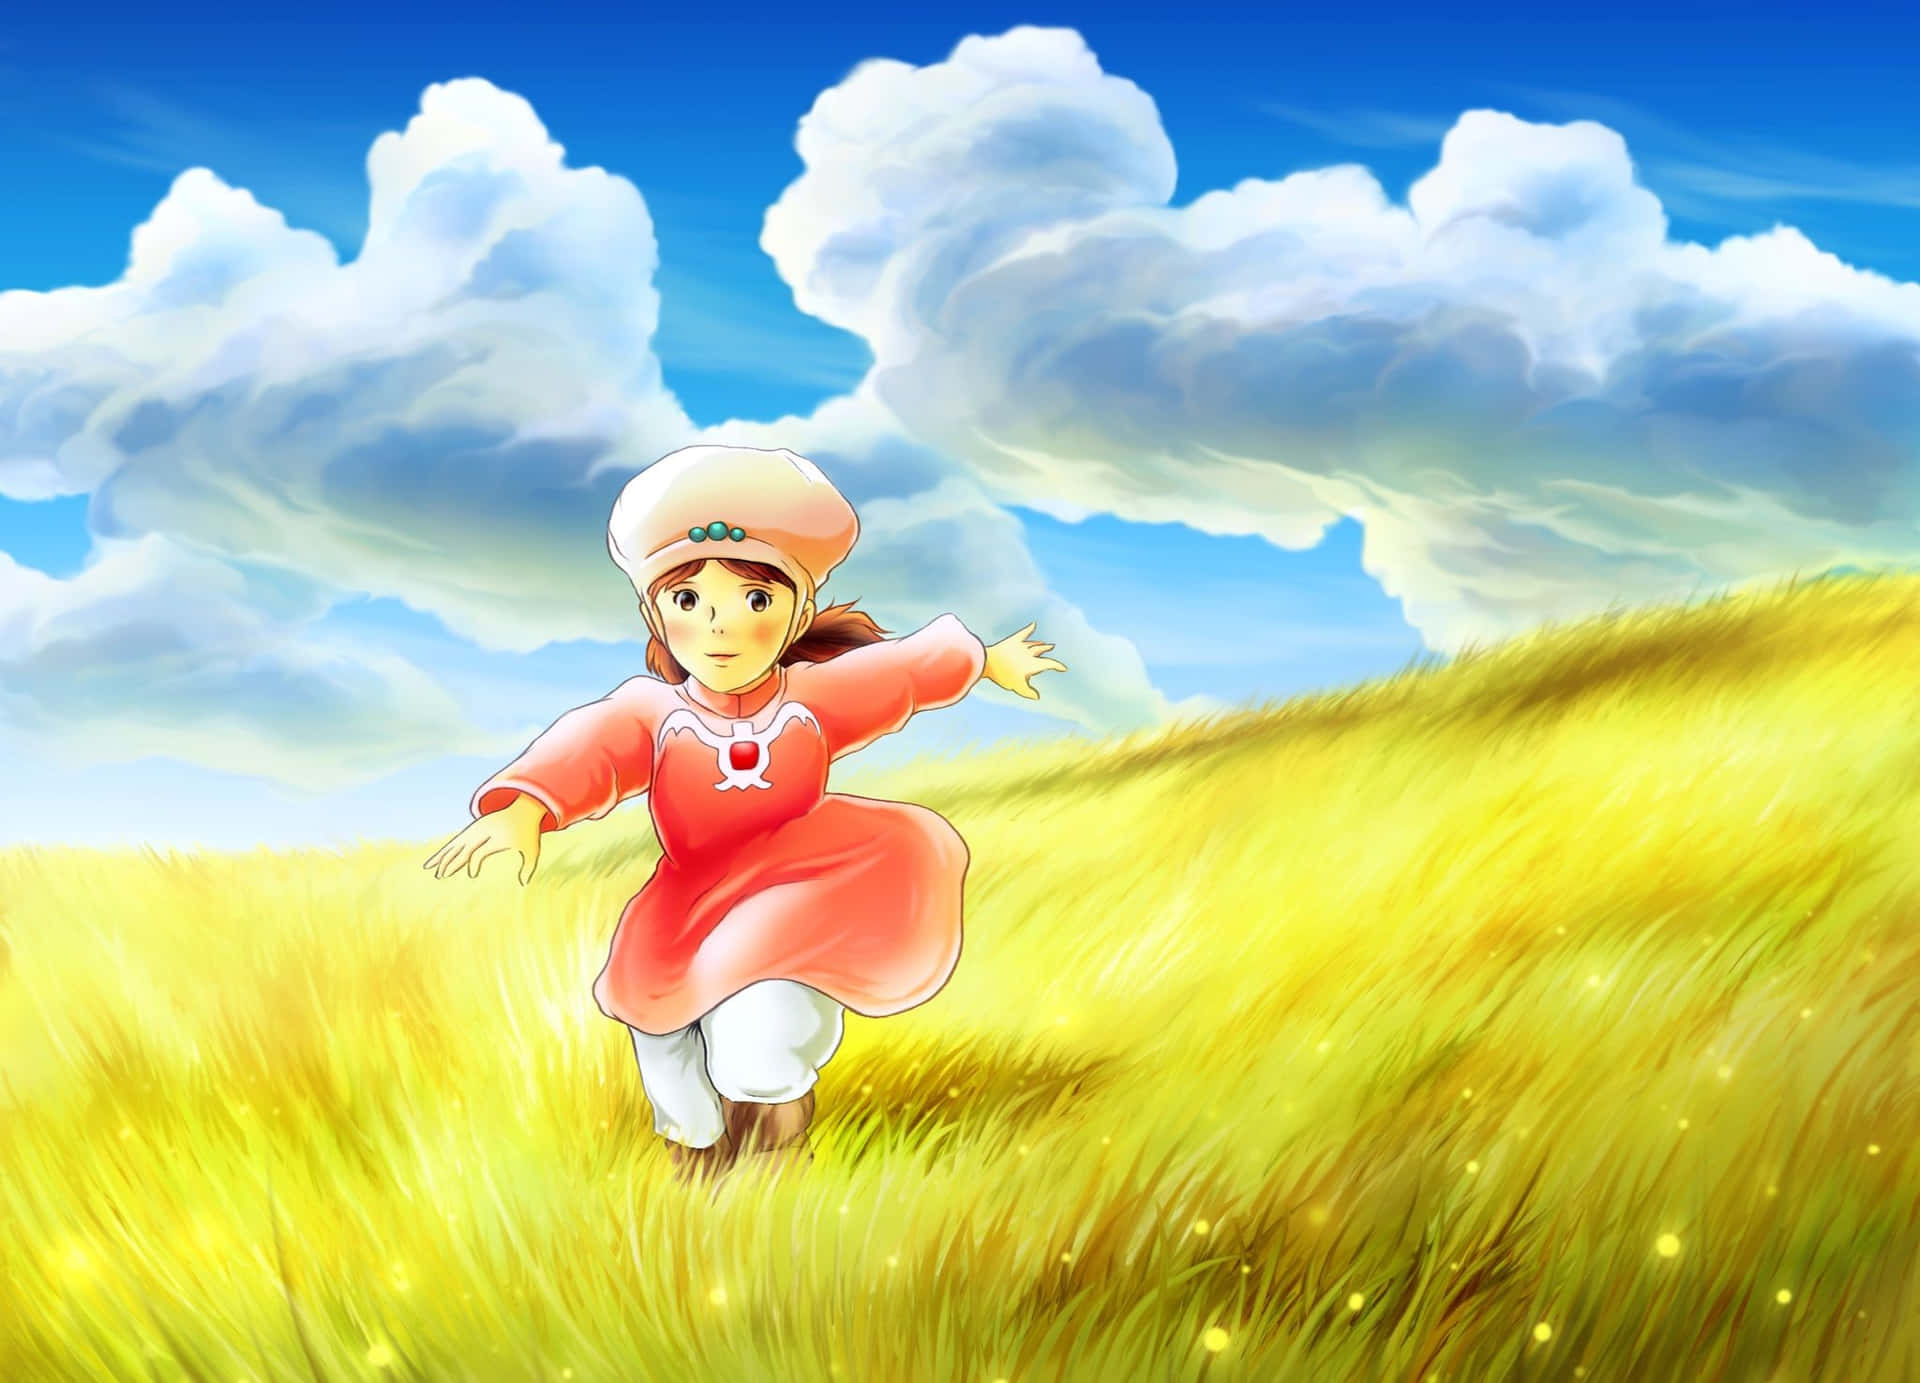 Nausicaä Soaring Through The Skies On Her Glider Amidst The Stunning Landscape Of The Valley Of The Wind. Background